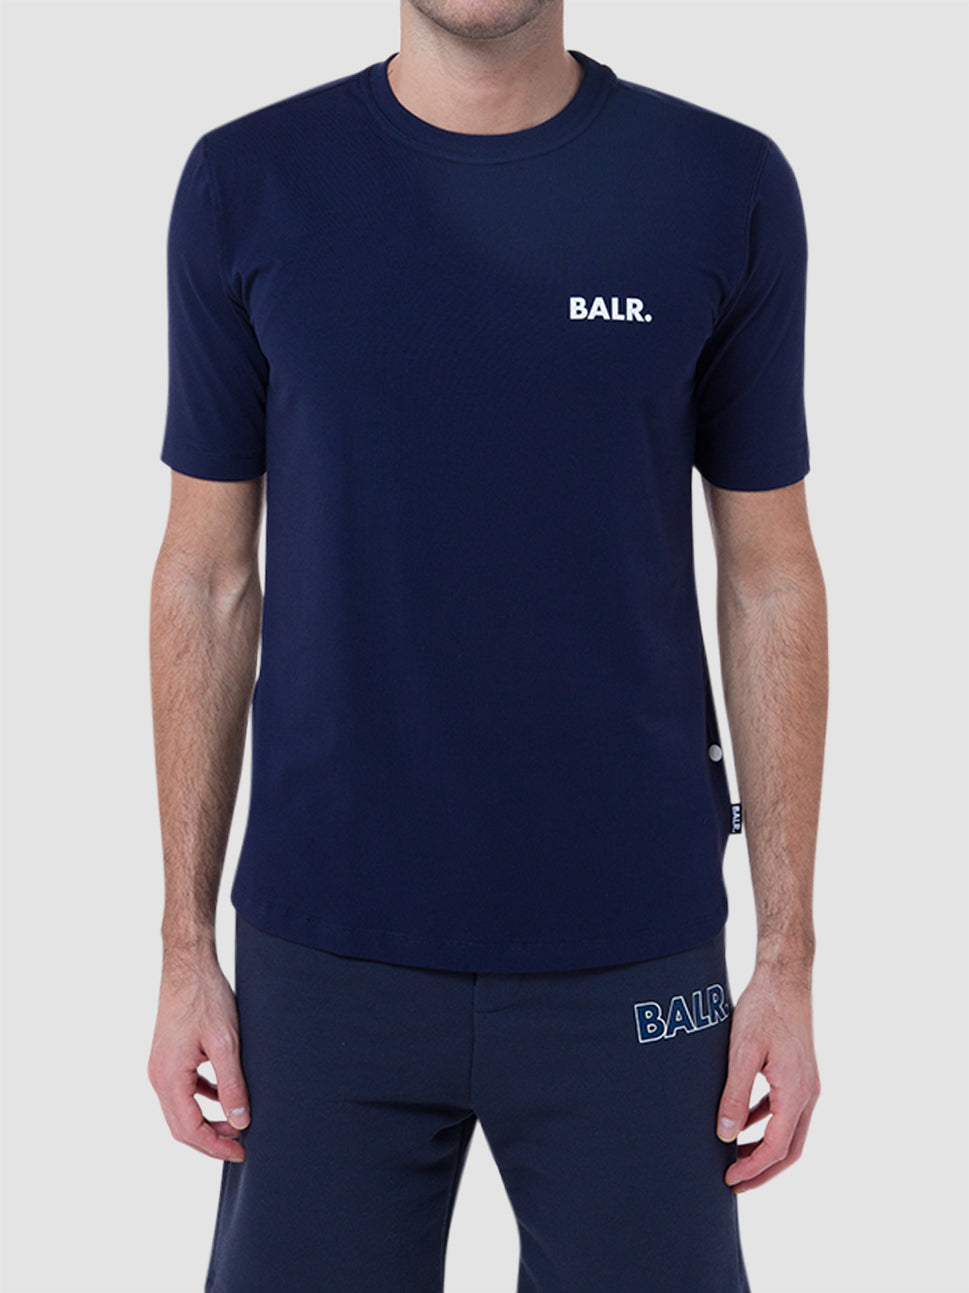 Balr Athletic Small Branded Chest T Shirt Navy Blue B1112.1050